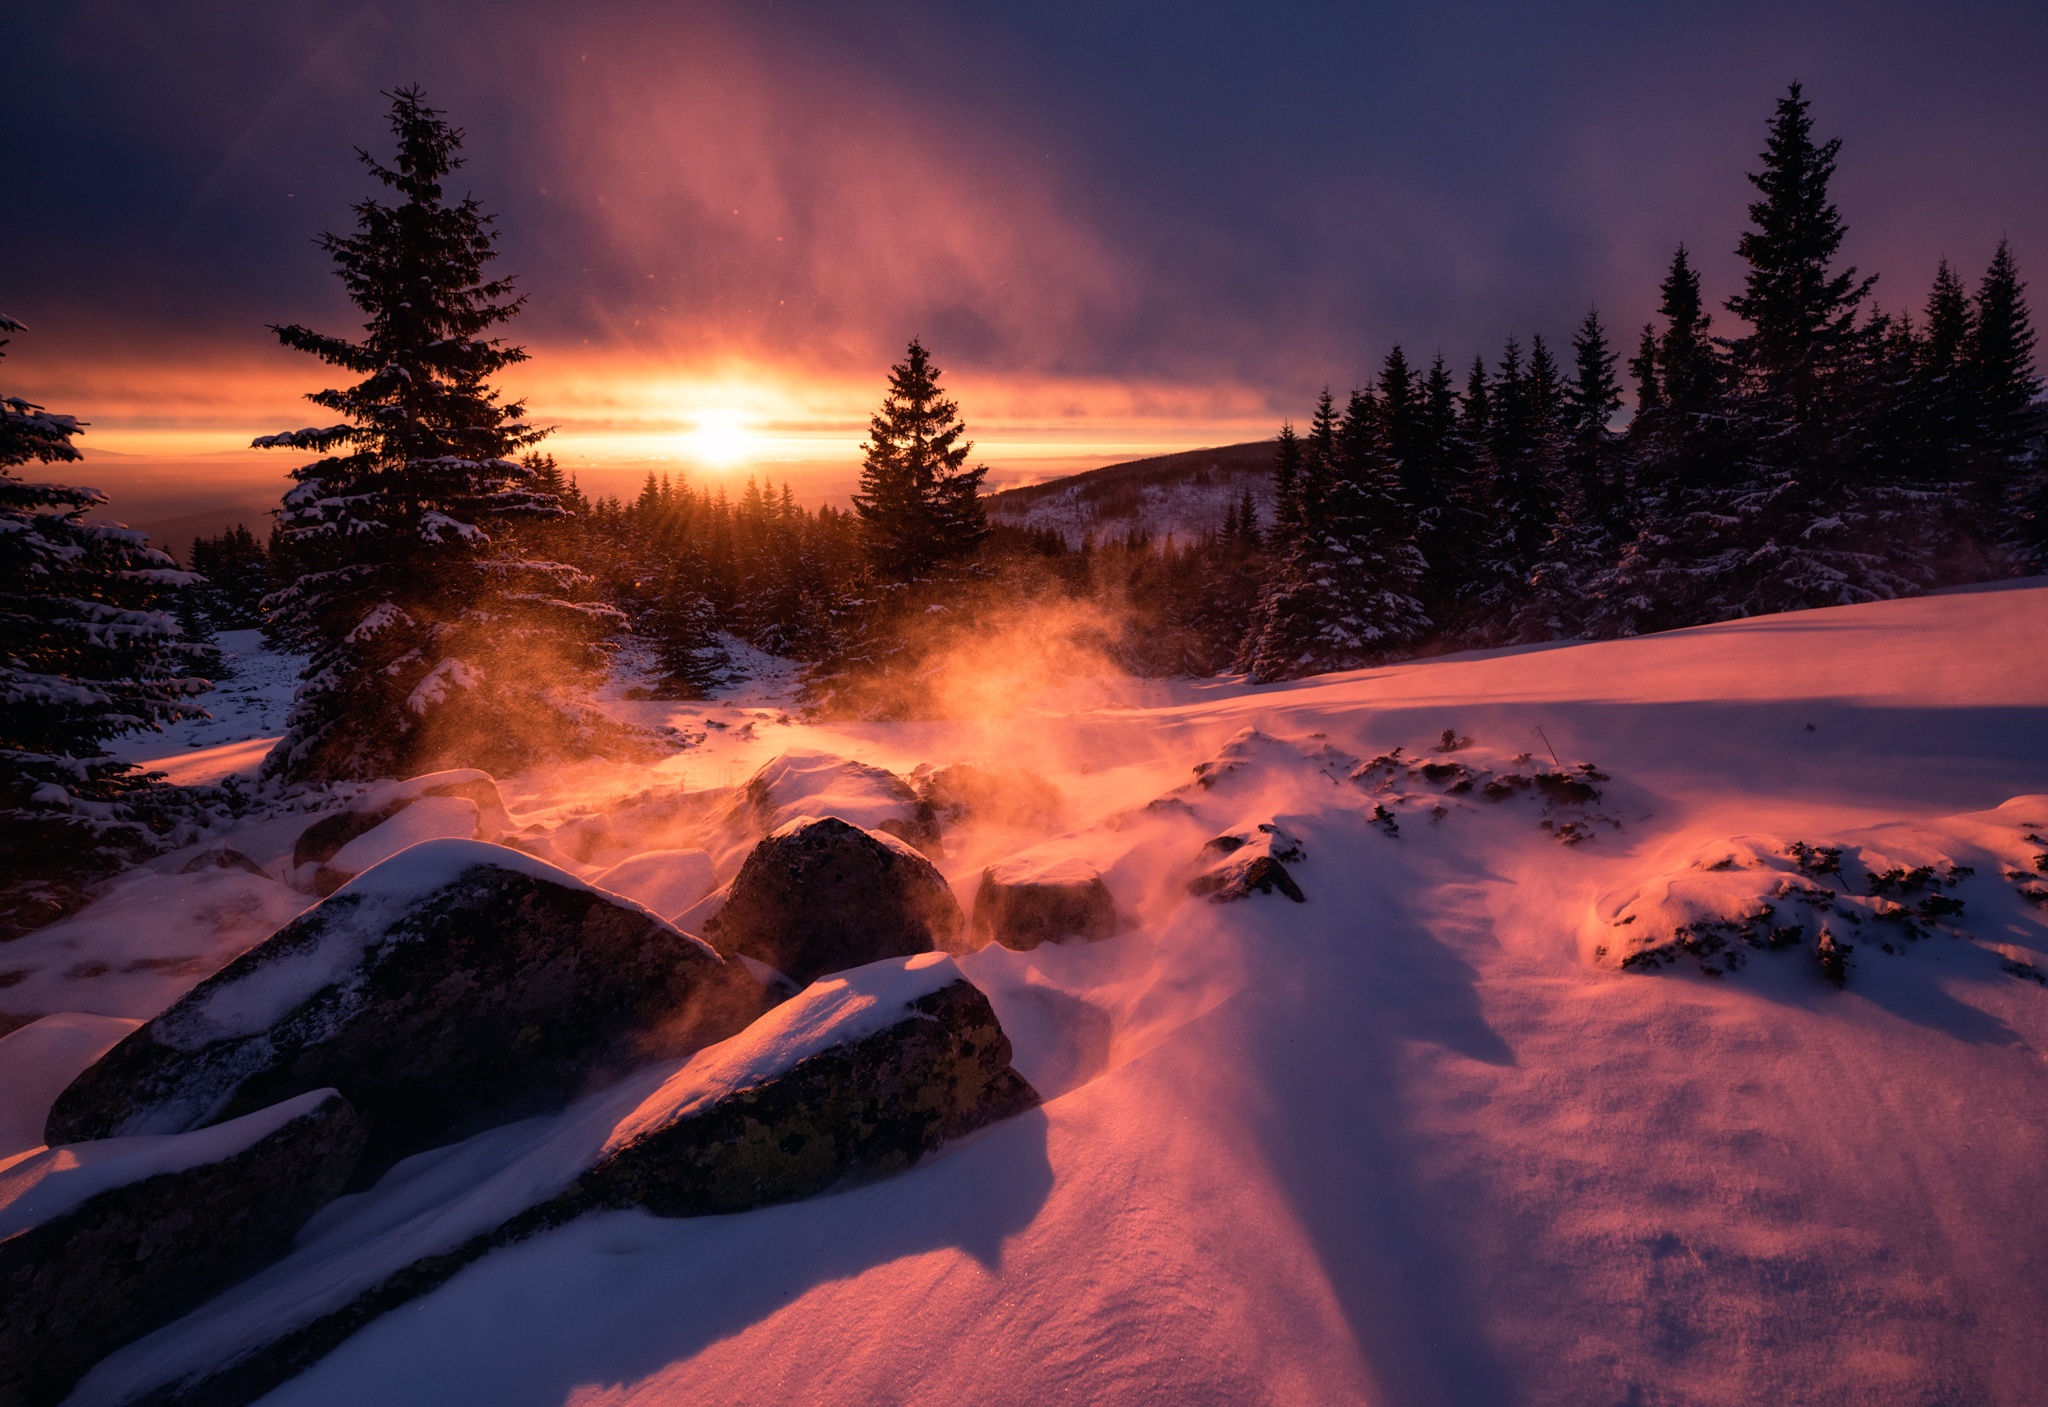 Winter Snow Sunset Wallpaper,Hd Nature Wallpapers,4K Wallpapers,Images